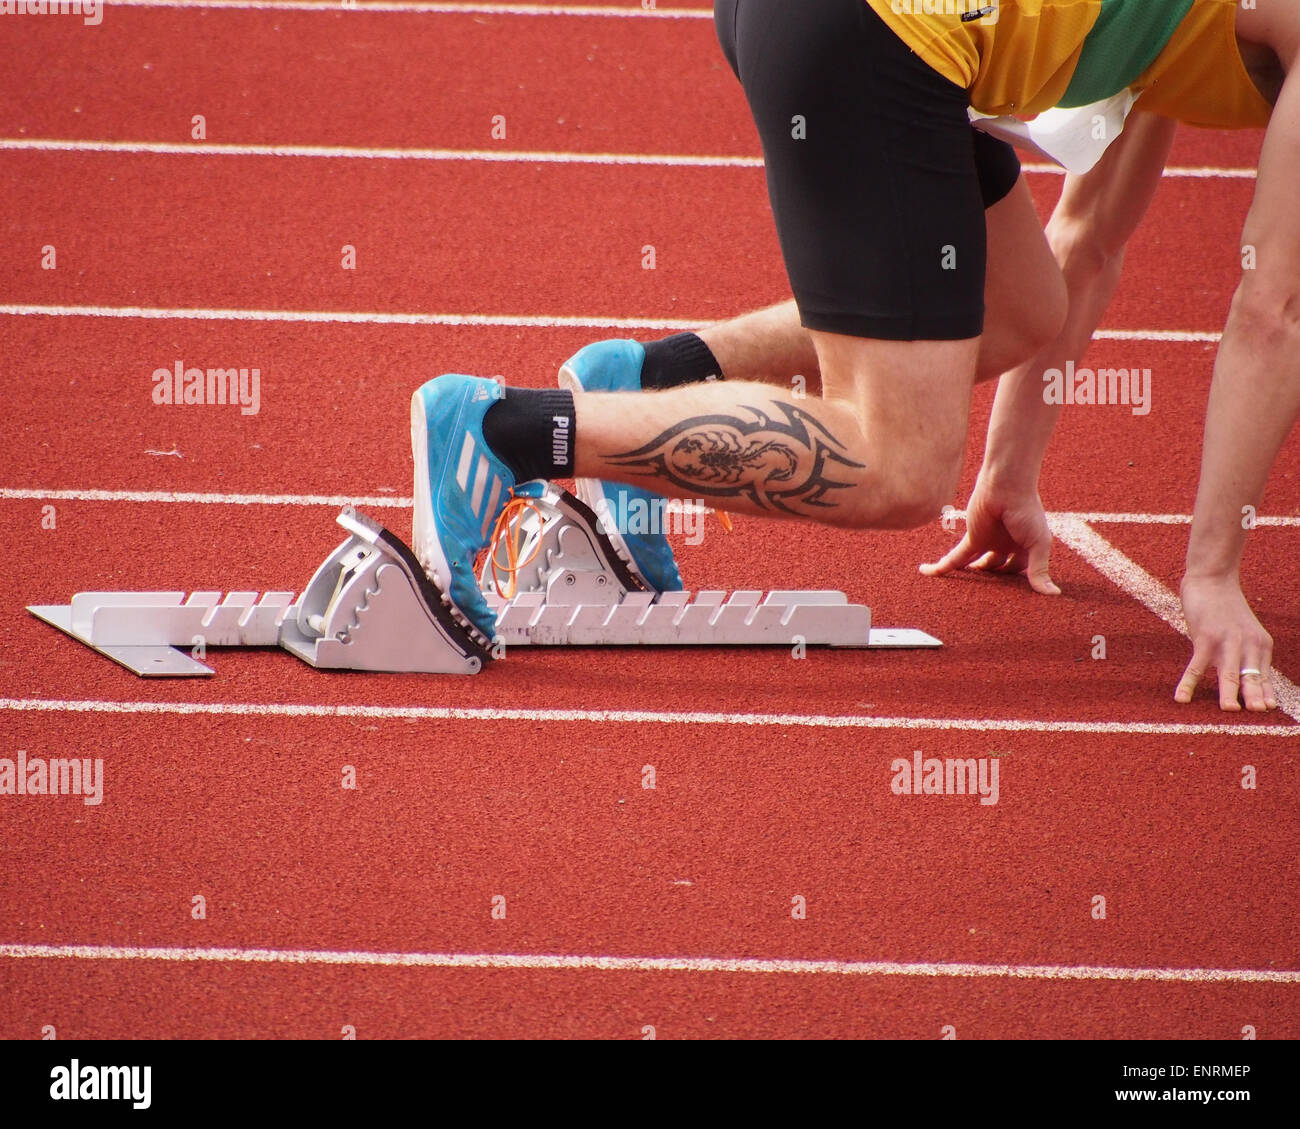 An Athletes feet placed firlmy onto starting blocks, ready to start a race Stock Photo